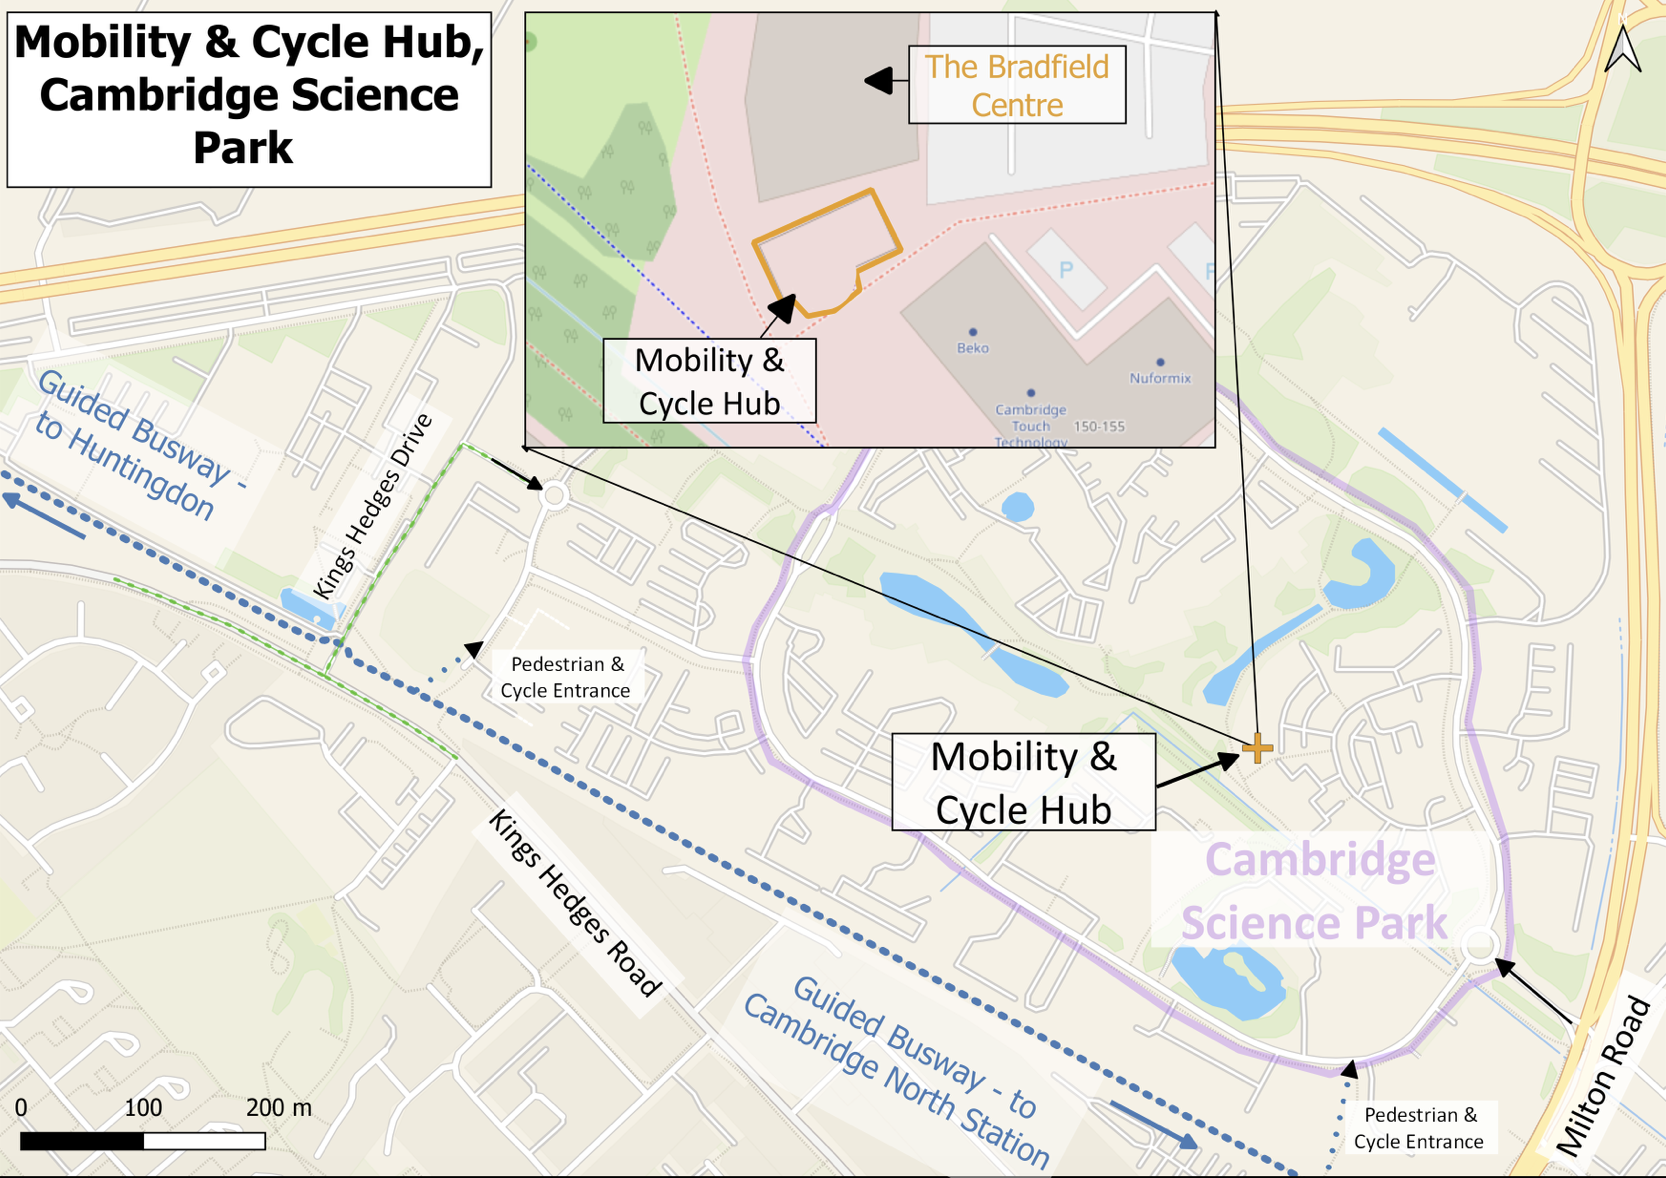 Mobility & Cycle Hub, Cambridge Science Park